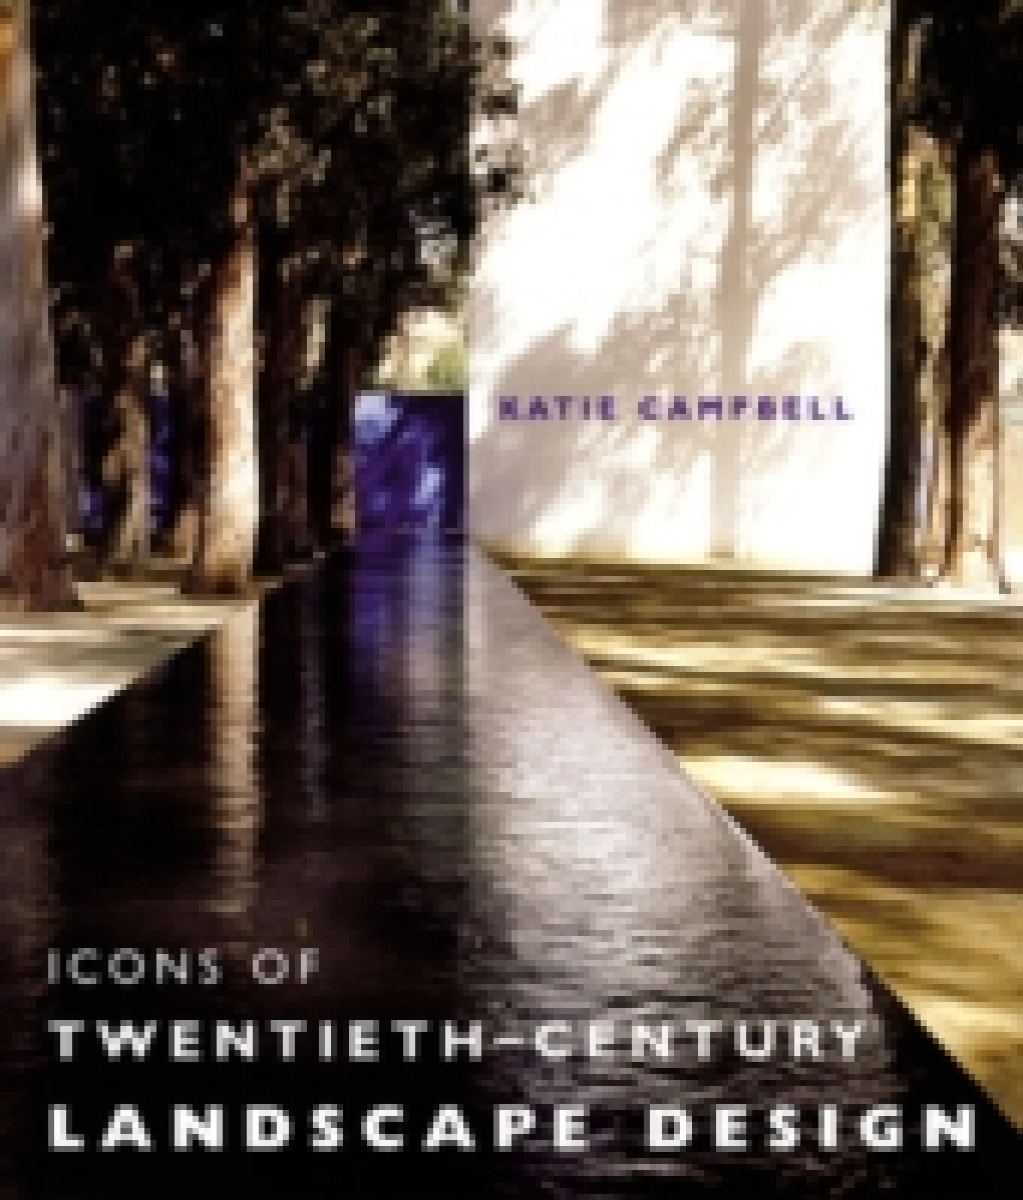 Campbell,Katie. Icons of 20th Century Landscape Design 